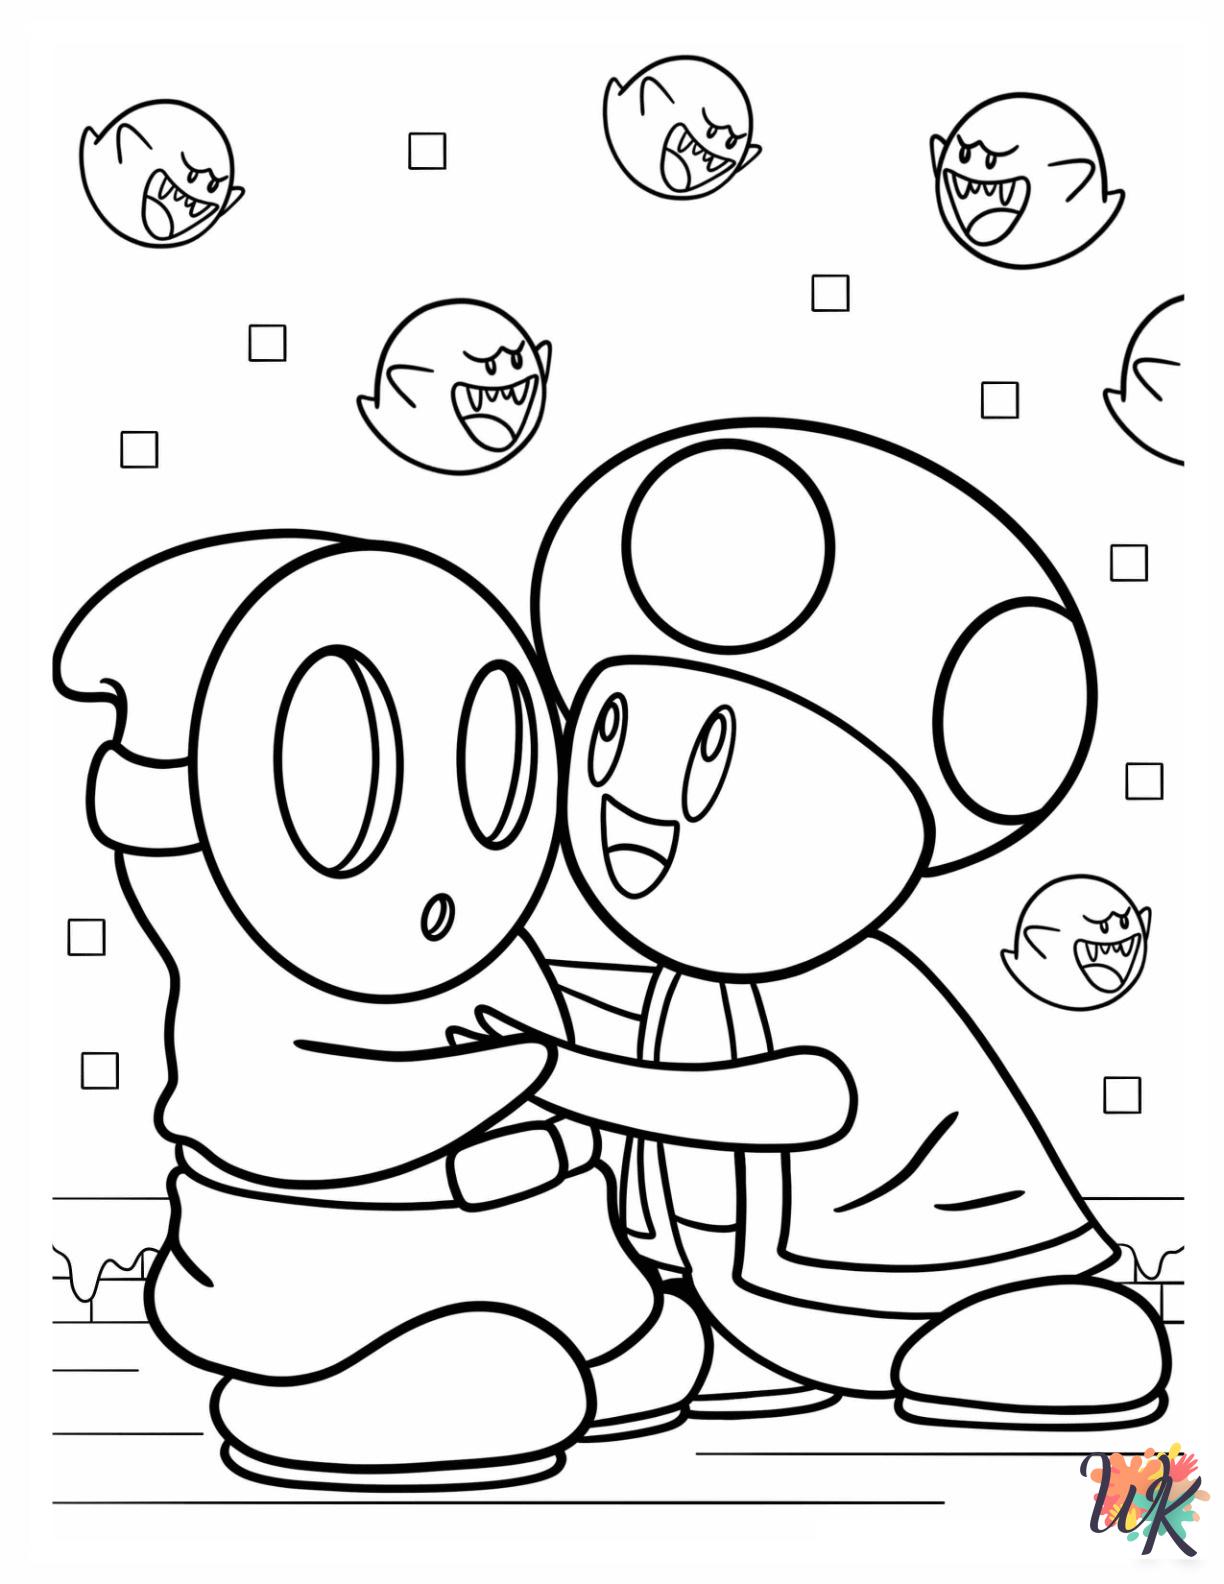 Shy Guy coloring pages free